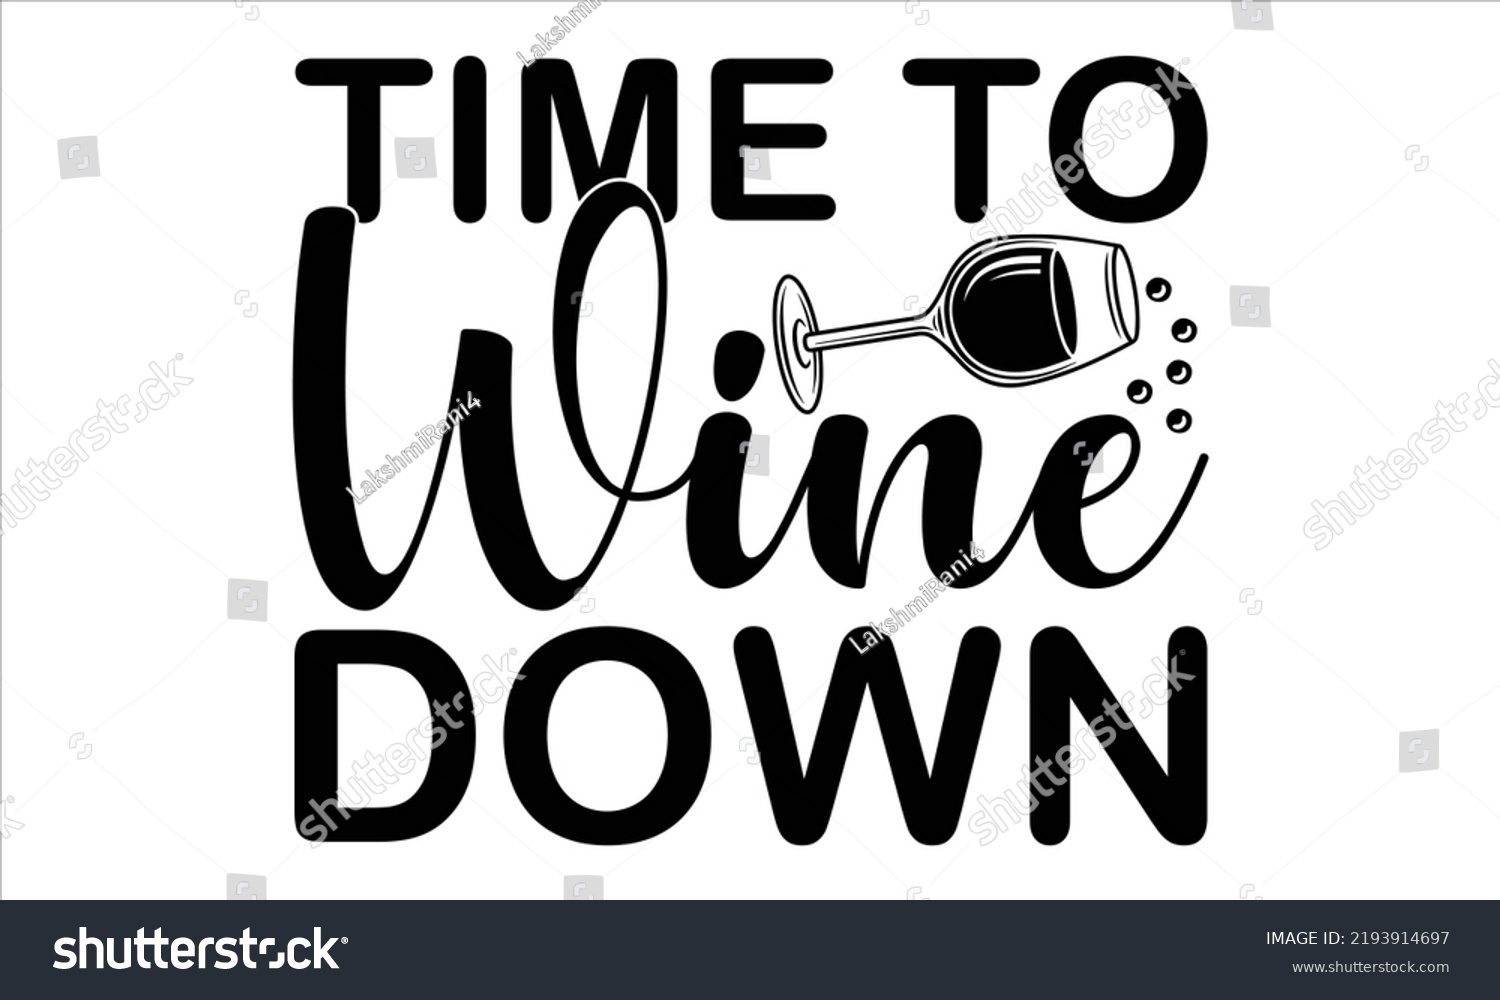 SVG of  Time to wine down  -   Lettering design for greeting banners, Mouse Pads, Prints, Cards and Posters, Mugs, Notebooks, Floor Pillows and T-shirt prints design. svg